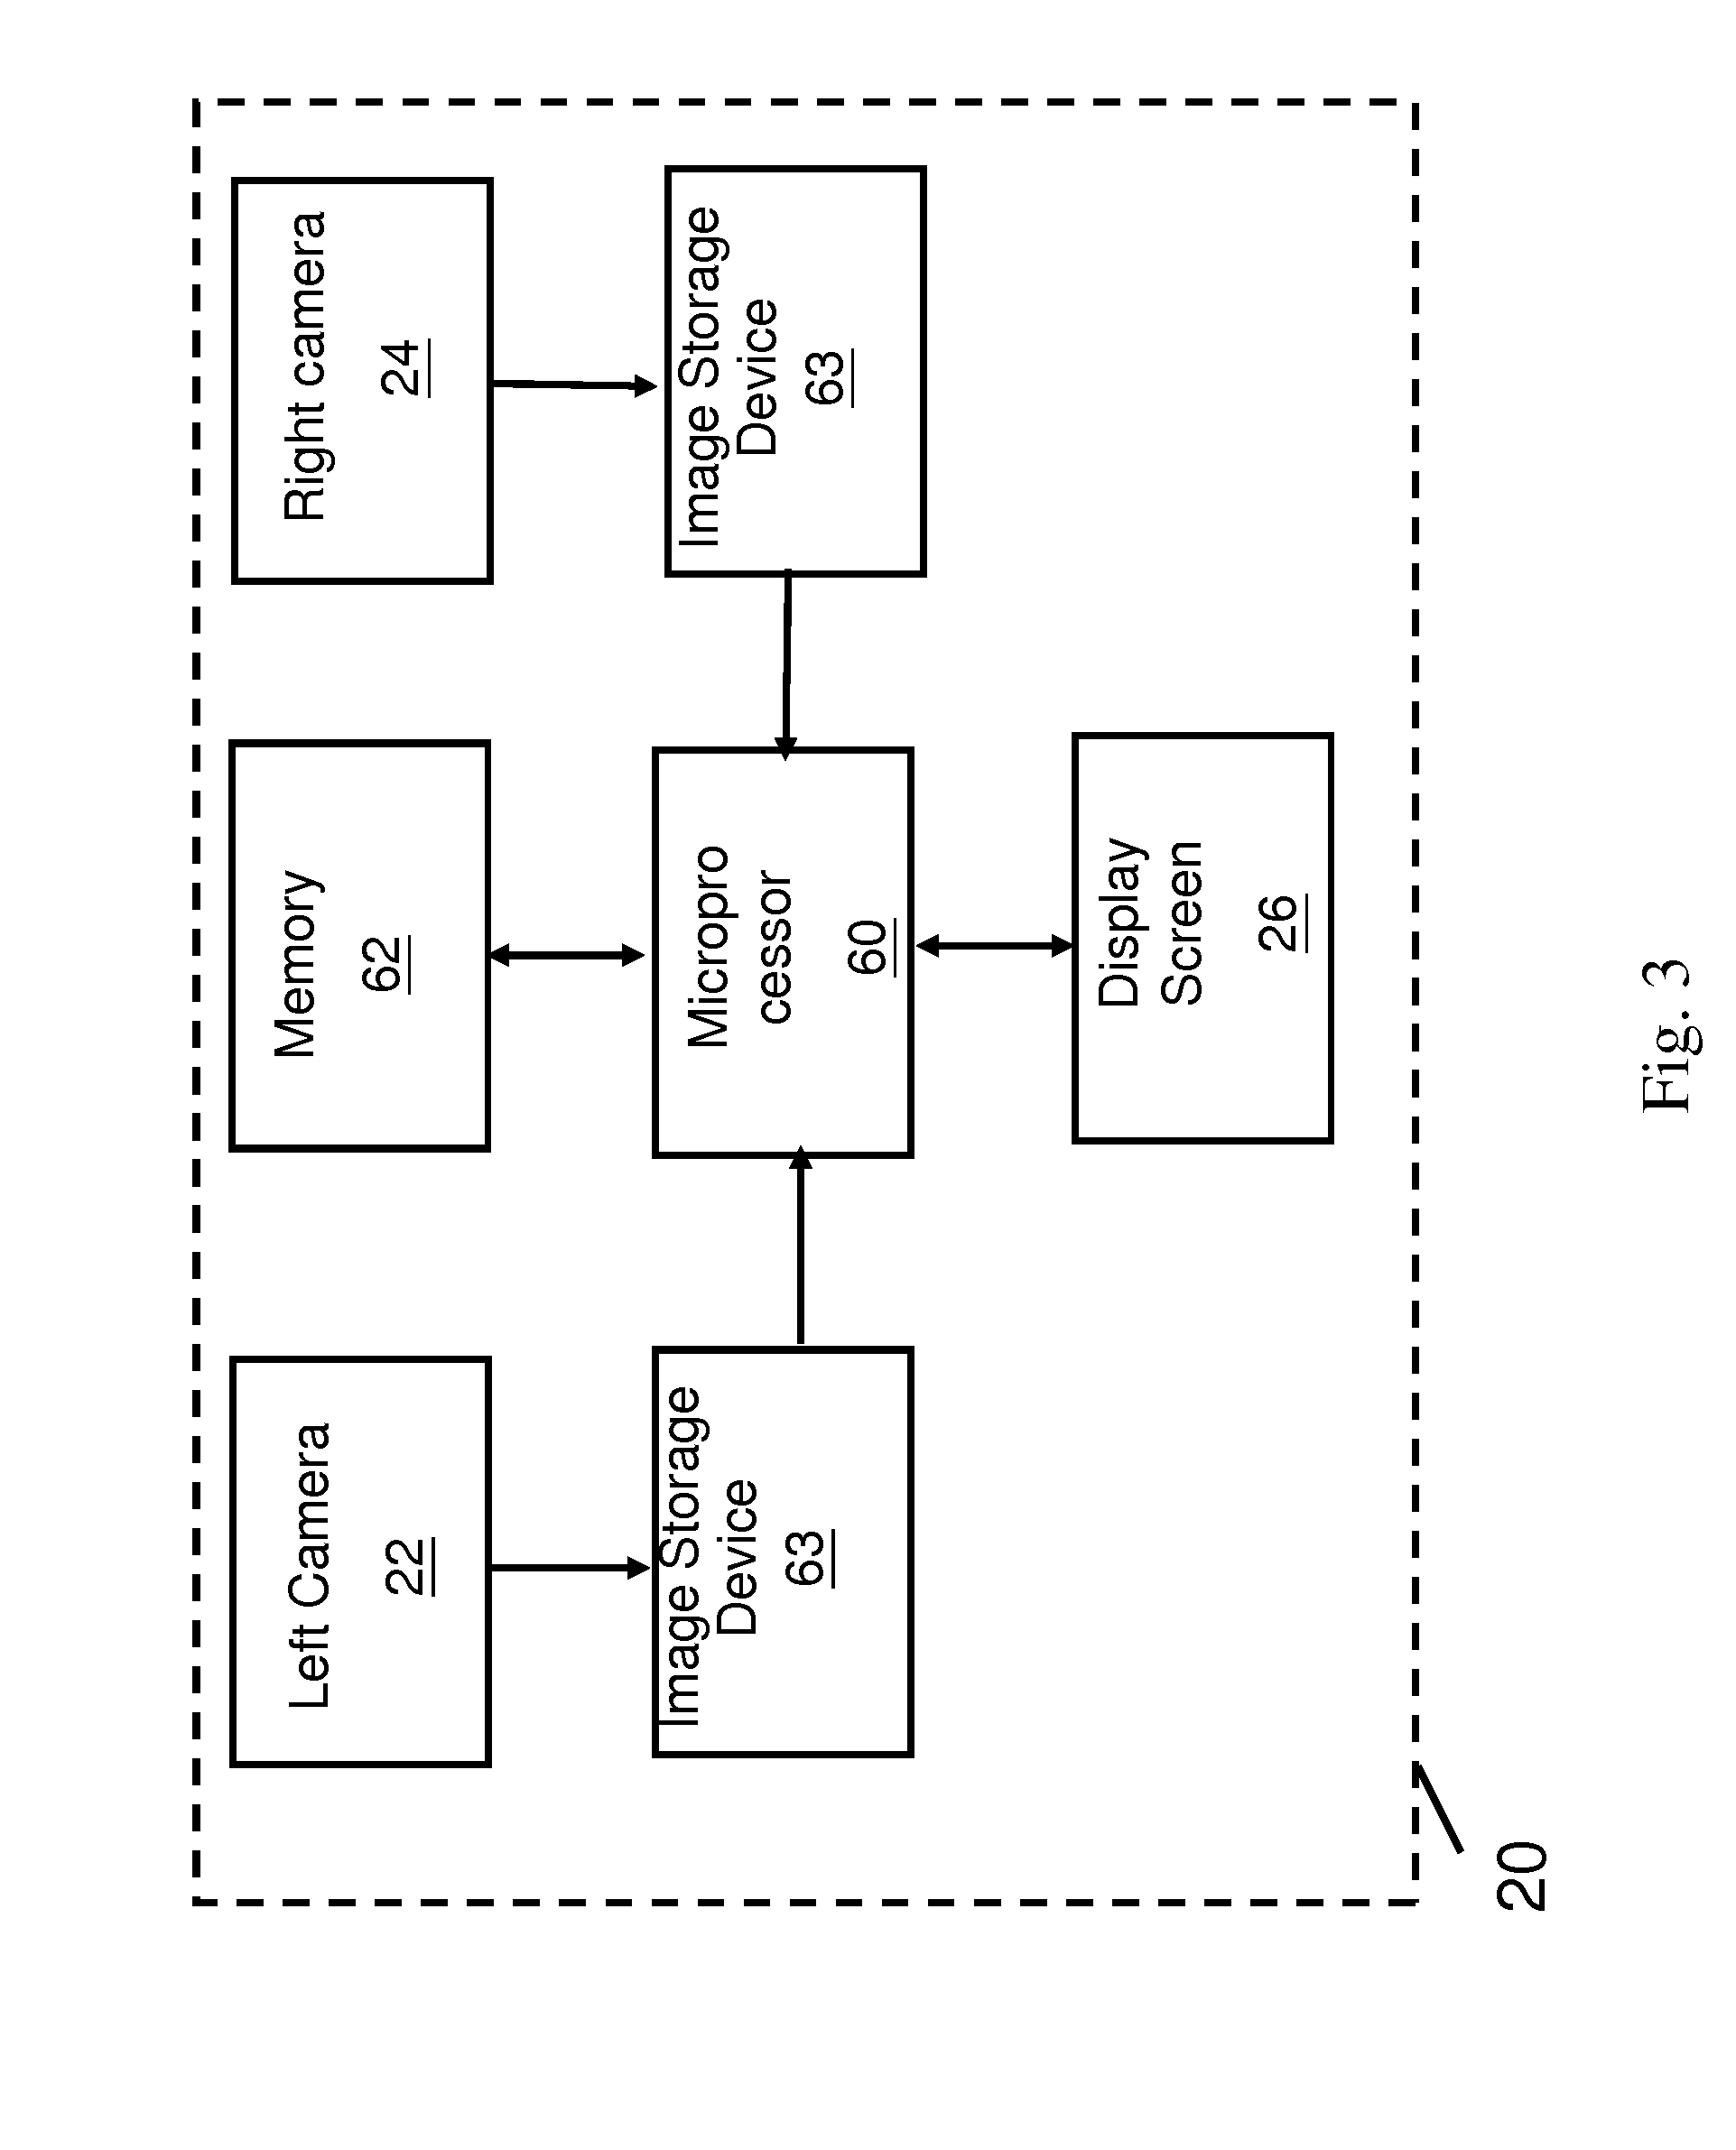 System and Method for Virtual Touch Sensing